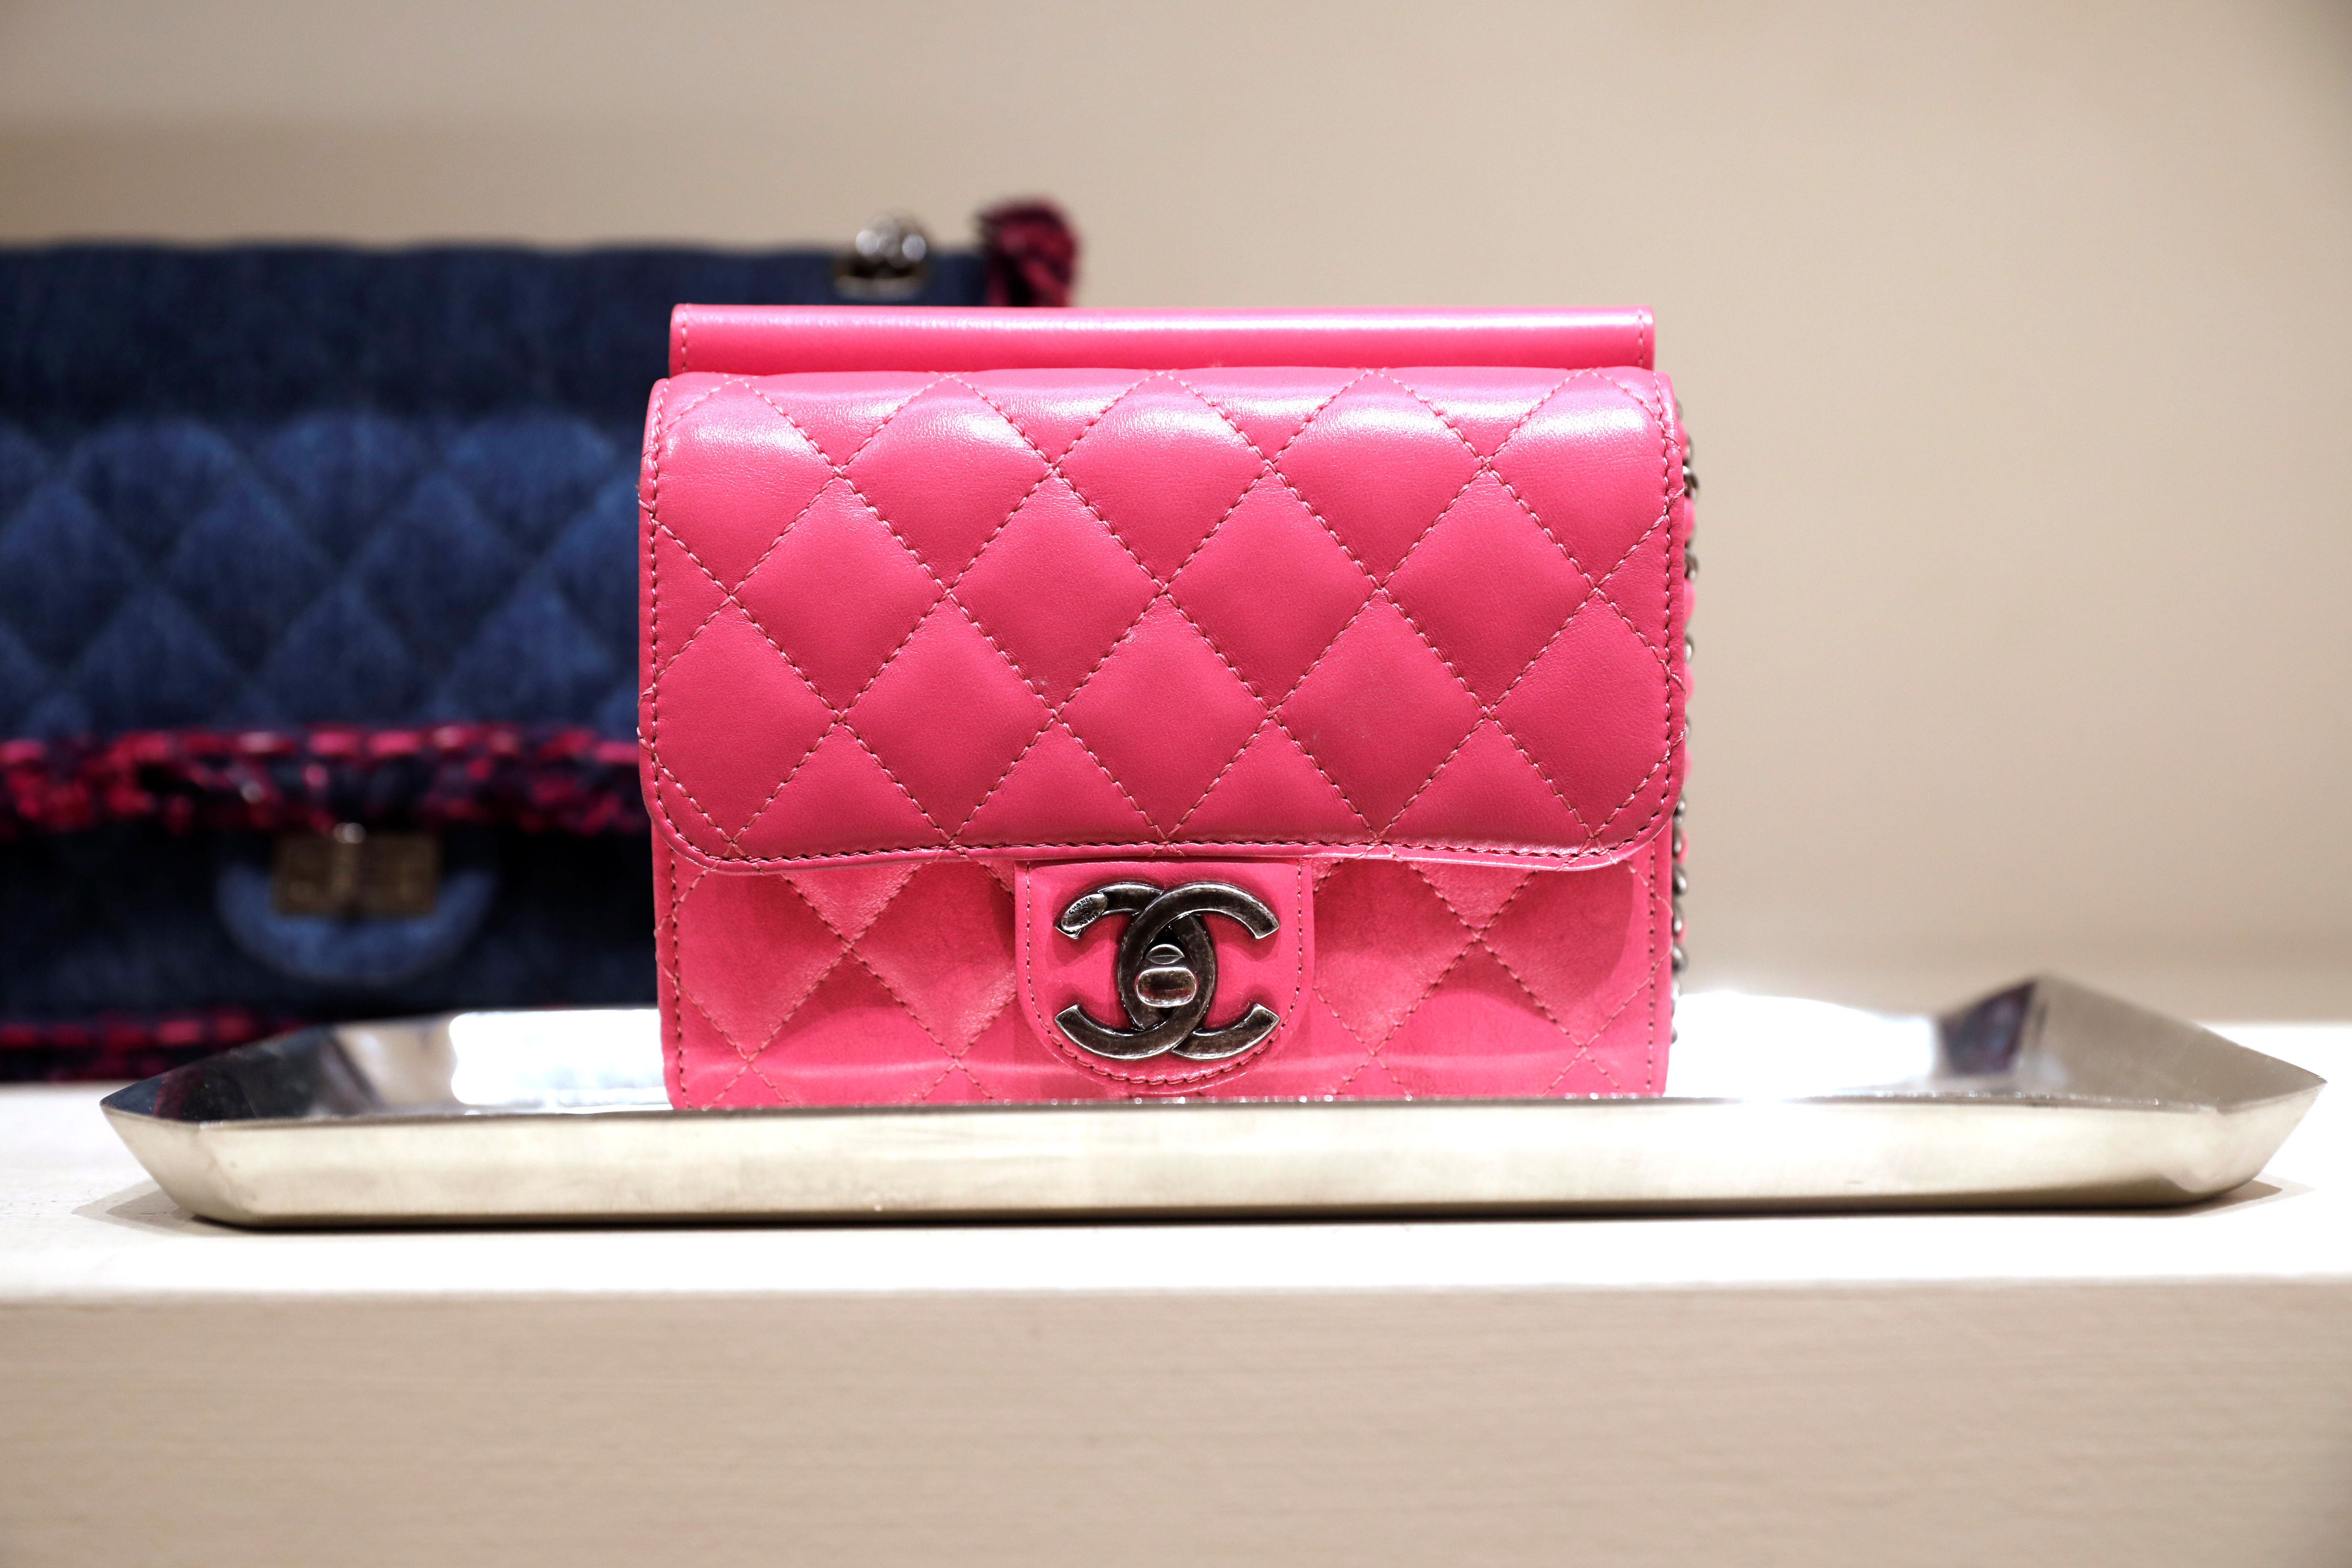 A luxury handbag from Chanel is displayed at The RealReal shop, a seven-year-old online reseller of luxury items on consignment in the Soho section of Manhattan, in New York City